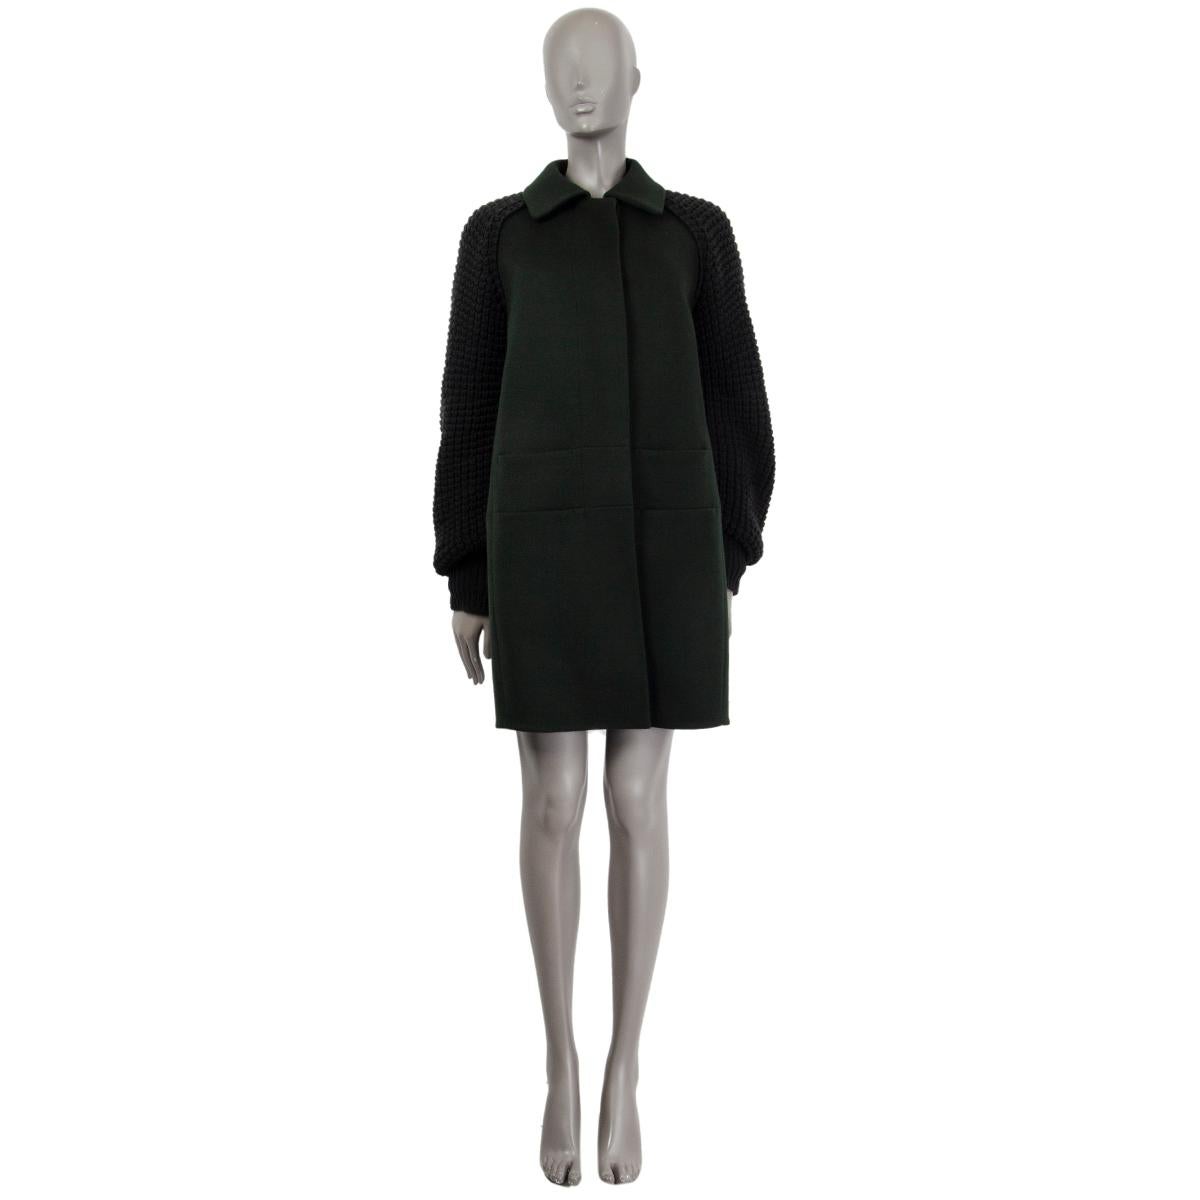 100% authentic AKRIS buttoned coat in forest green cashmere (100%) with knitted raglan sleeves. 4 slit pockets at front and hidden button closure. Lining of the sleeves is viscose (100%). Has been worn once and has a tiny month bite on the pocket. 